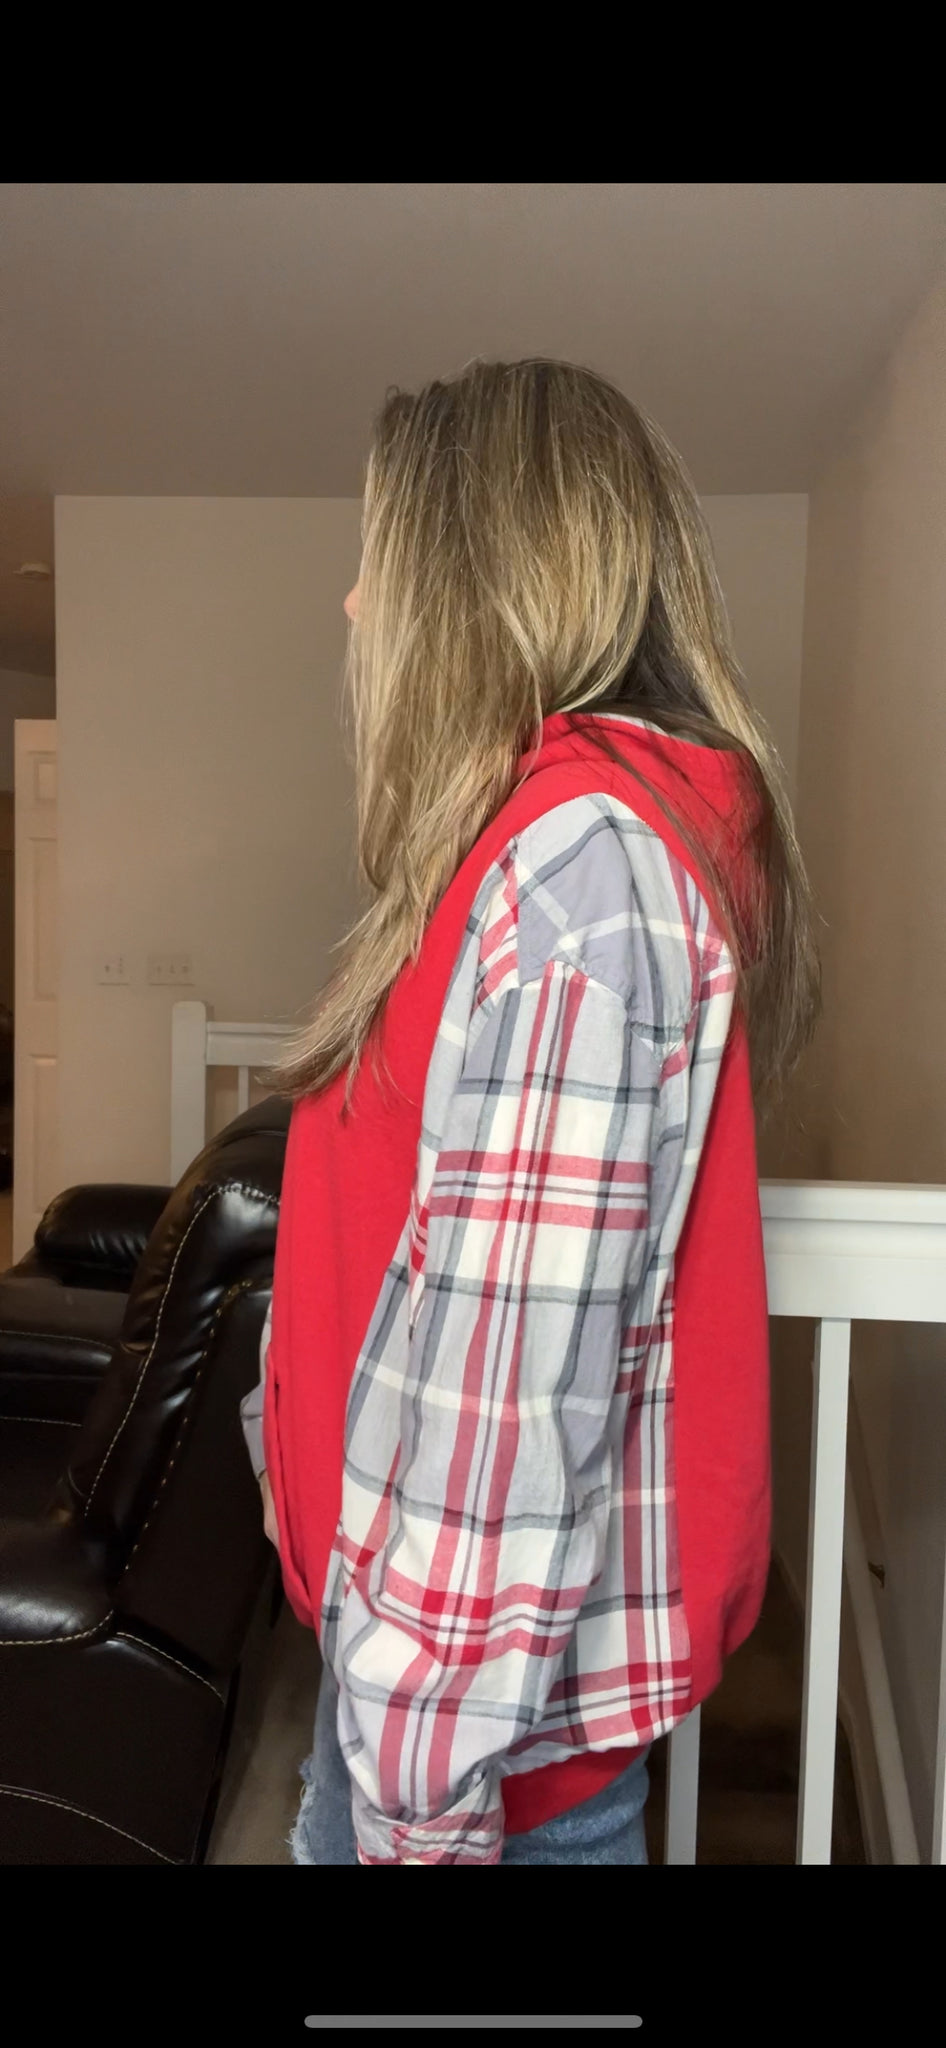 Ohio State - woman’s XL - midweight sweatshirt with flannel sleeves ￼